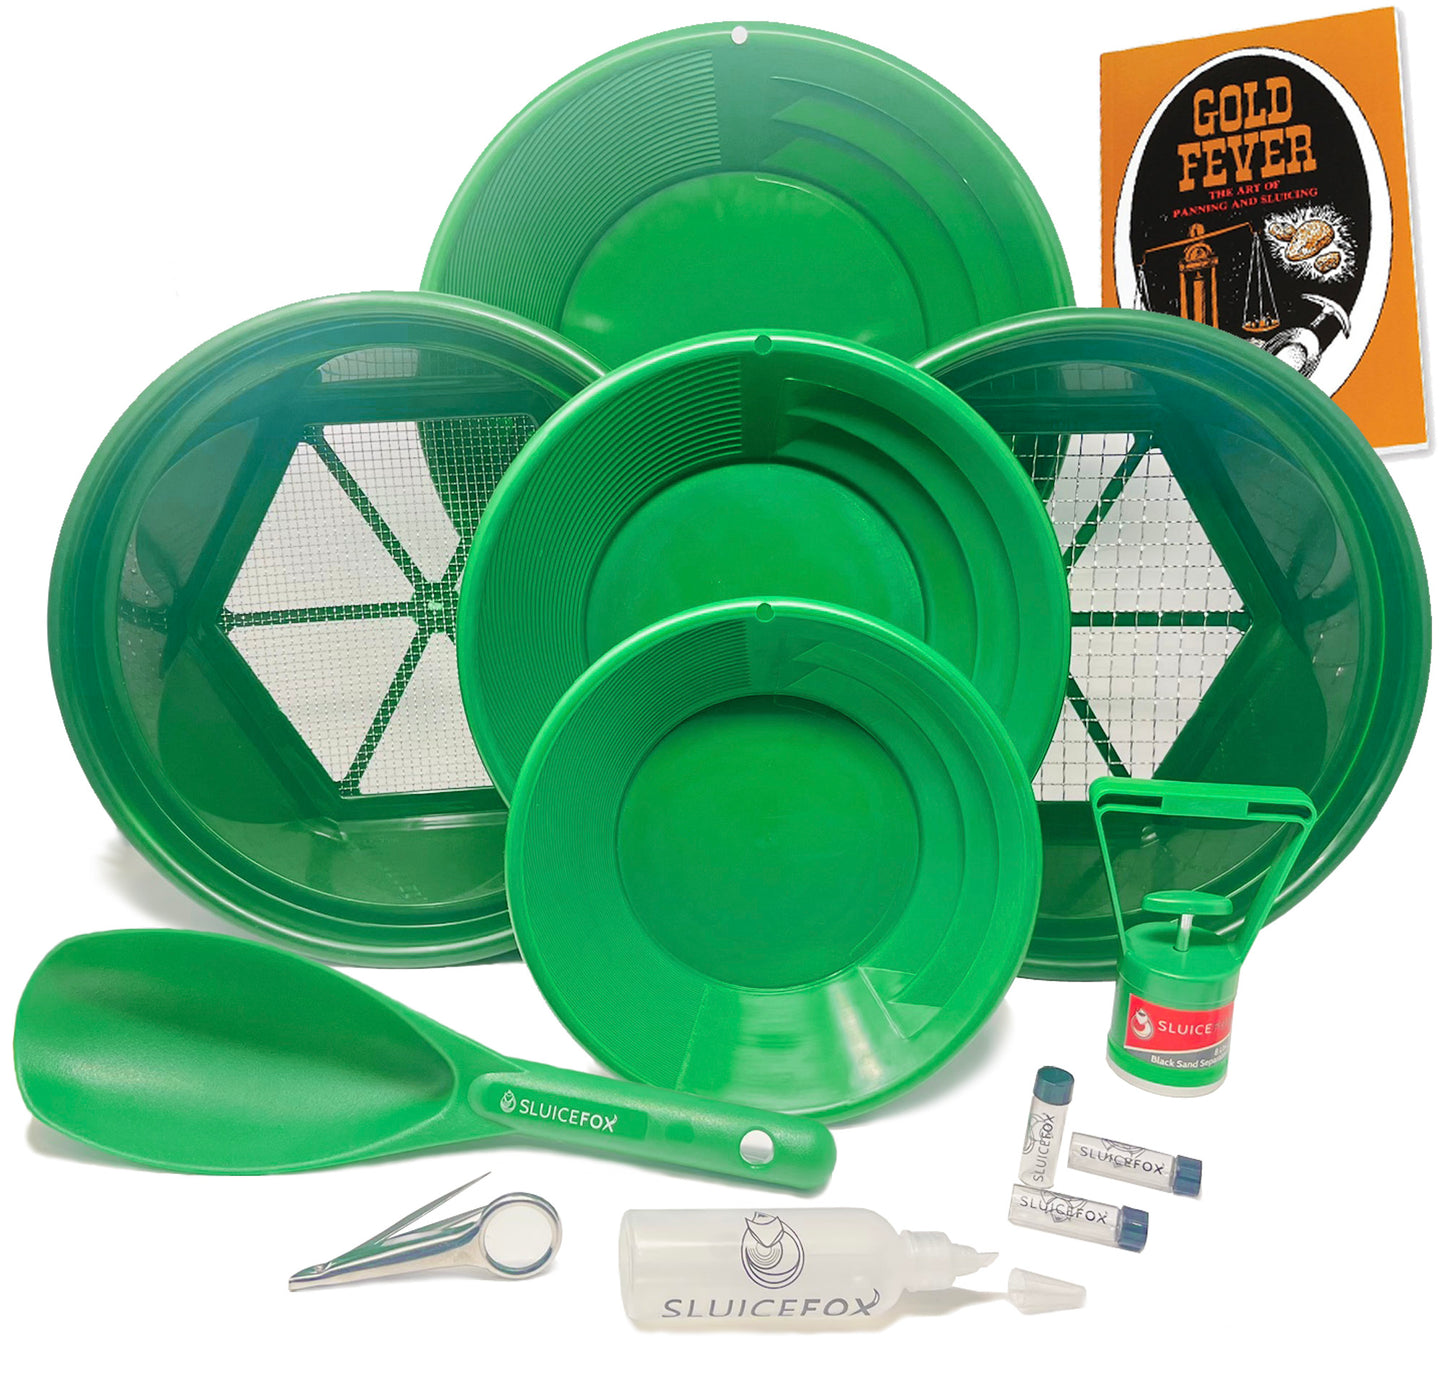 Gold panning kit for gold prospecting; 11 pc set + Bonus includes 3 gold pans; 2 gold classifiers; paydirt scoop small plastic gold shovel; snifter bottle; black sand gold magnet and Gold Fever book!